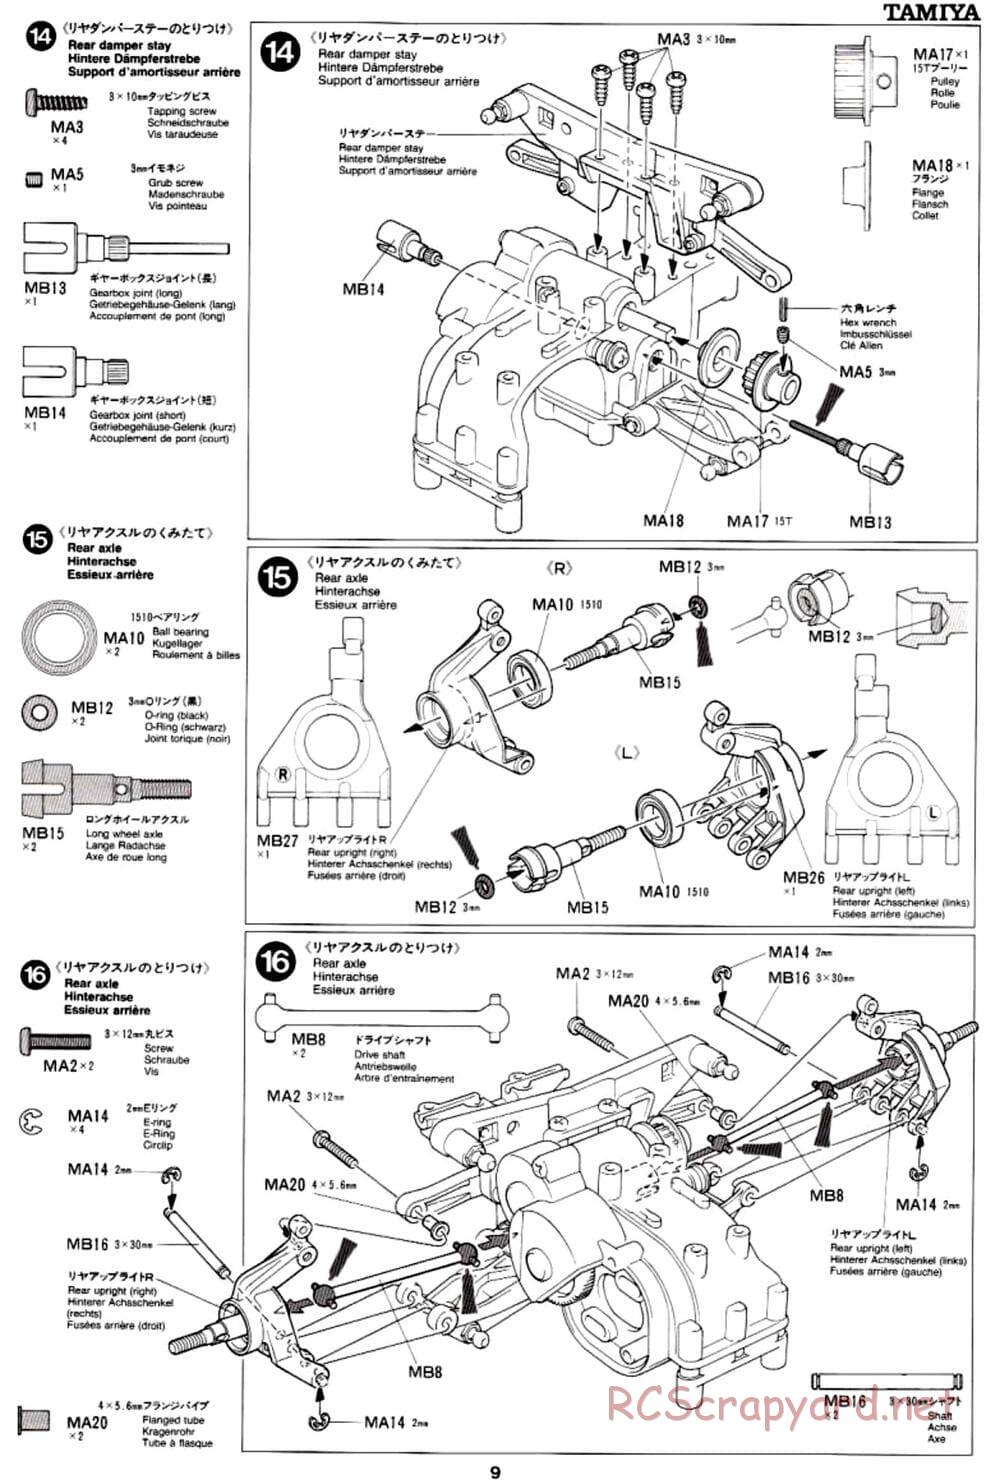 Tamiya - TA-03R TRF Special Edition Chassis - Manual - Page 9